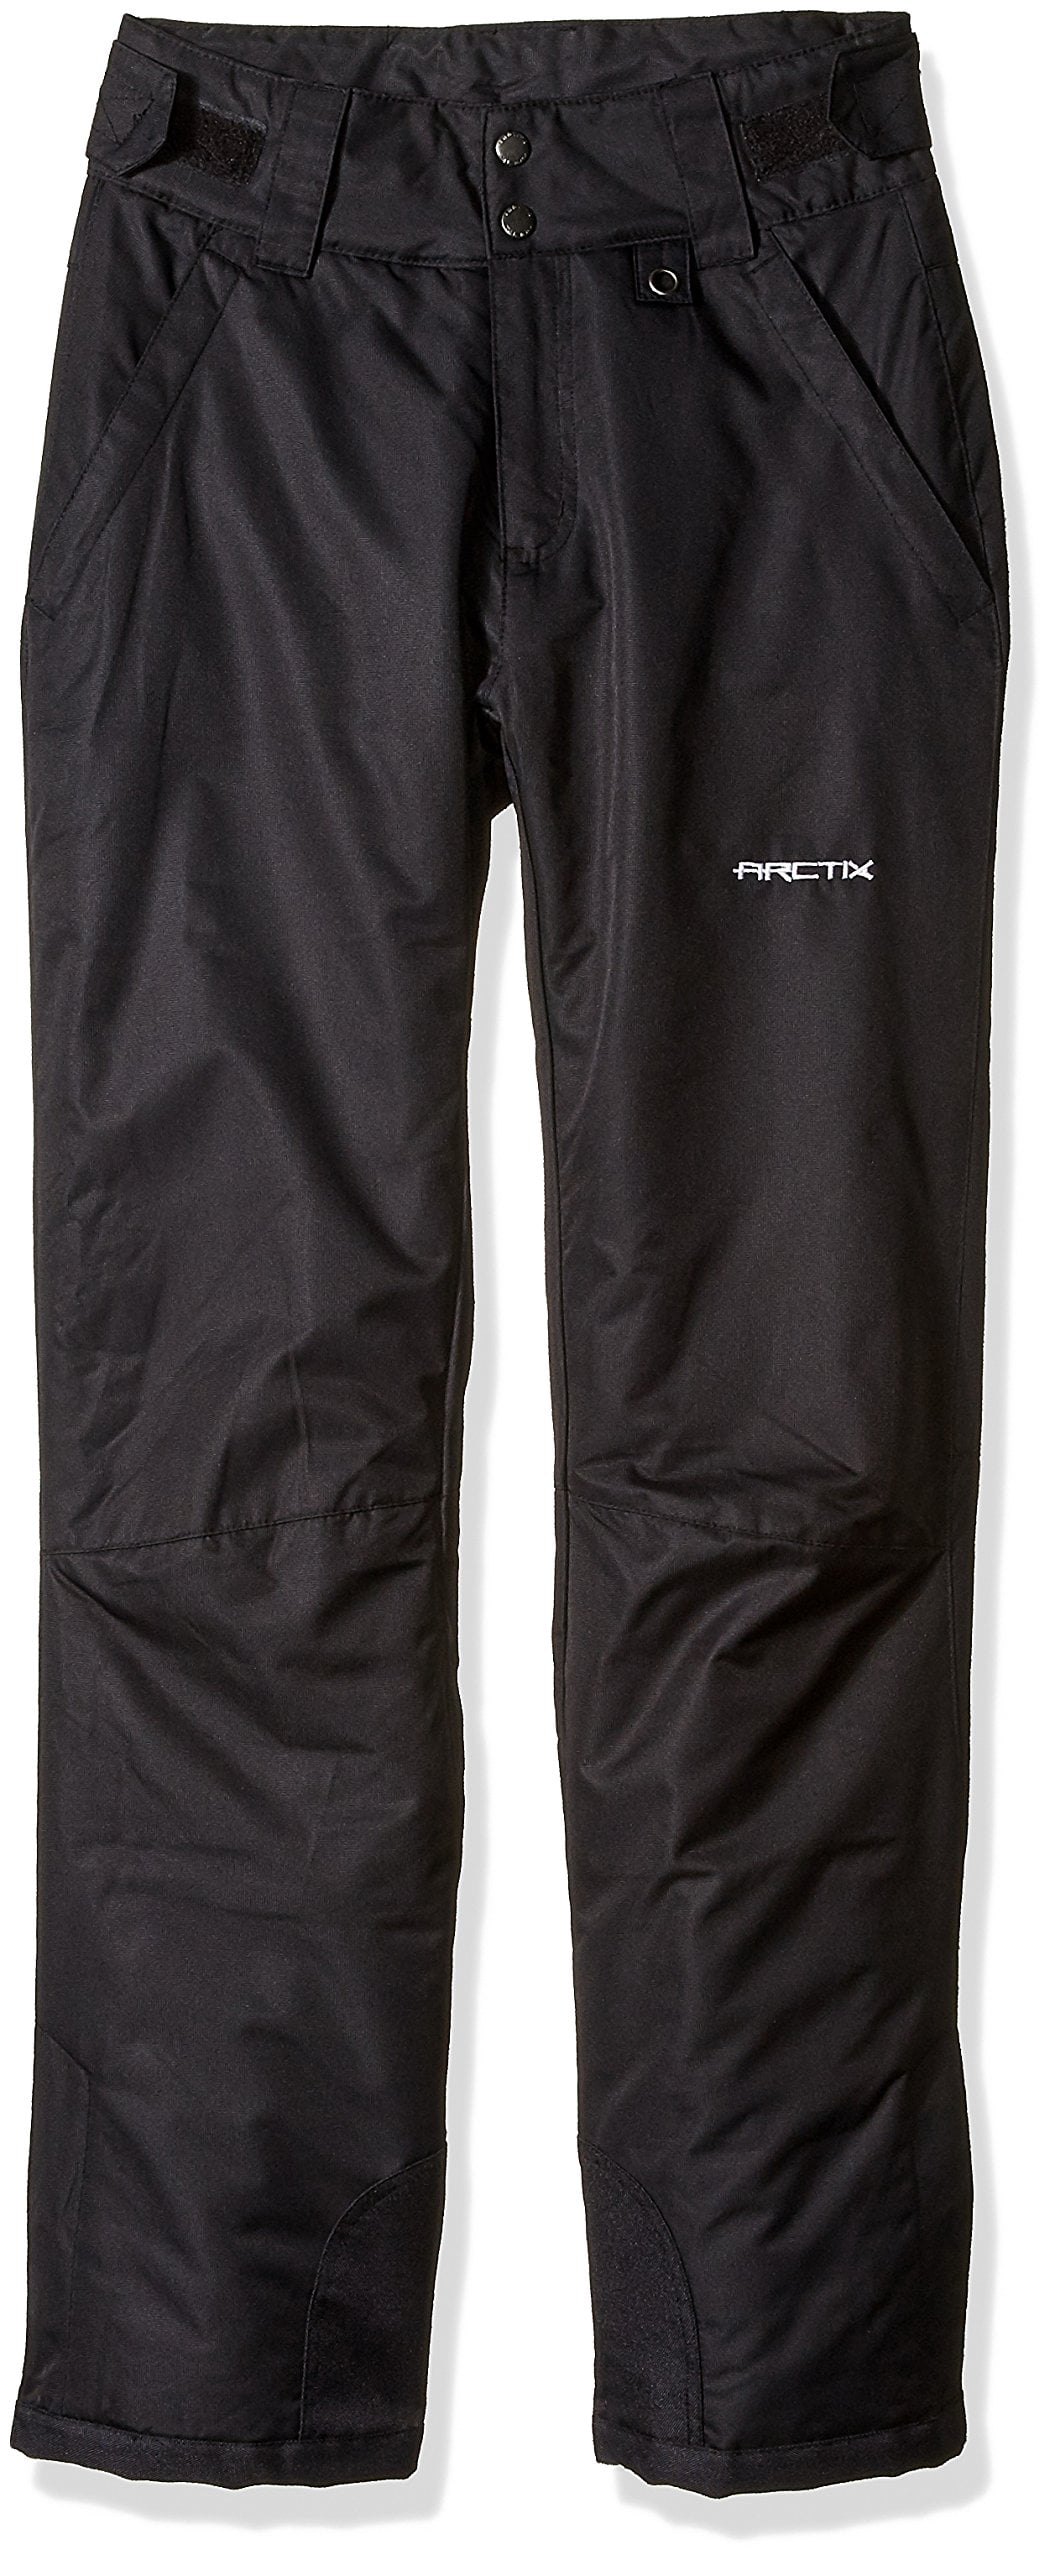 ARCTIX Womens Waterproof Insulated Snow Pants Black 3x 1800x for sale online 